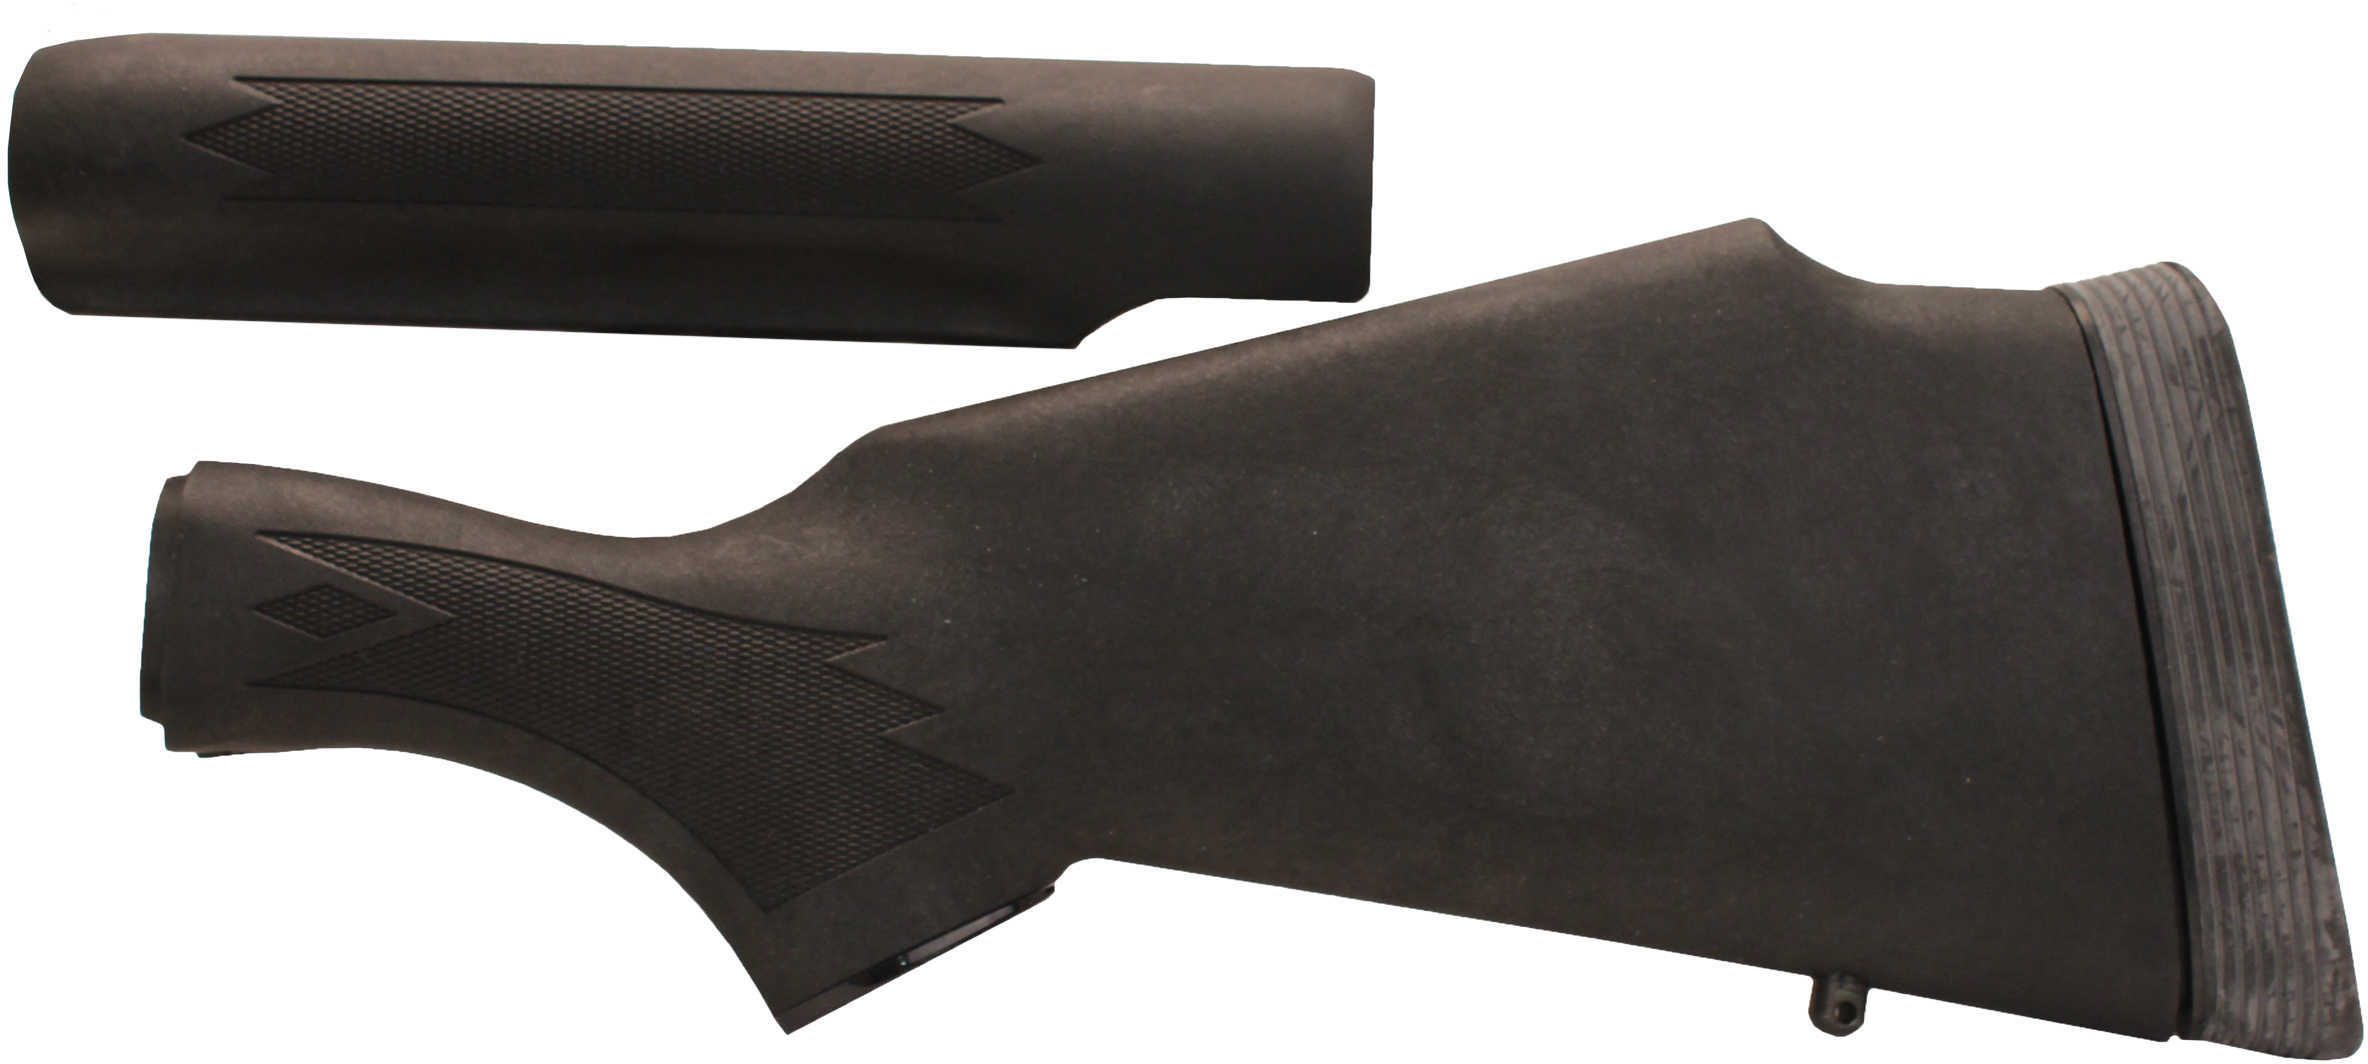 Remington 870 12 Gauge Synthetic Monte Carlo Stock and Forend Matte Black Md: 19487